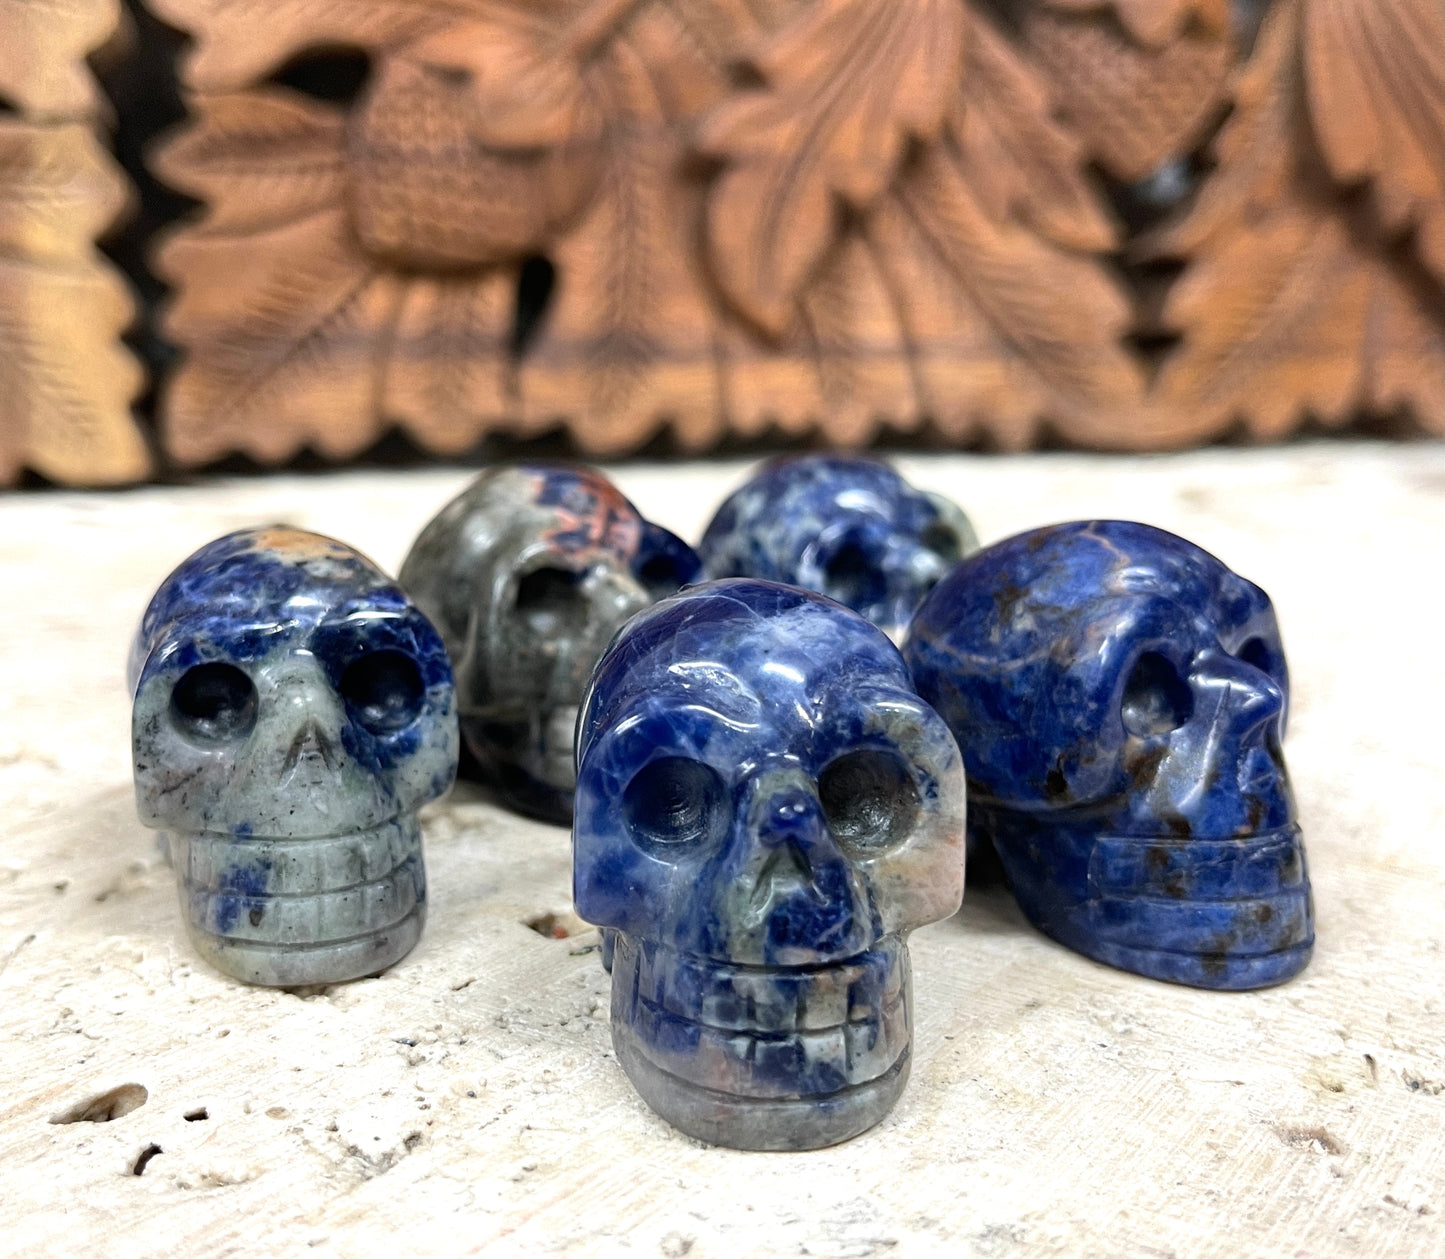 Hand Carved Crystal Skulls 1.5" - Available in 12 Stones